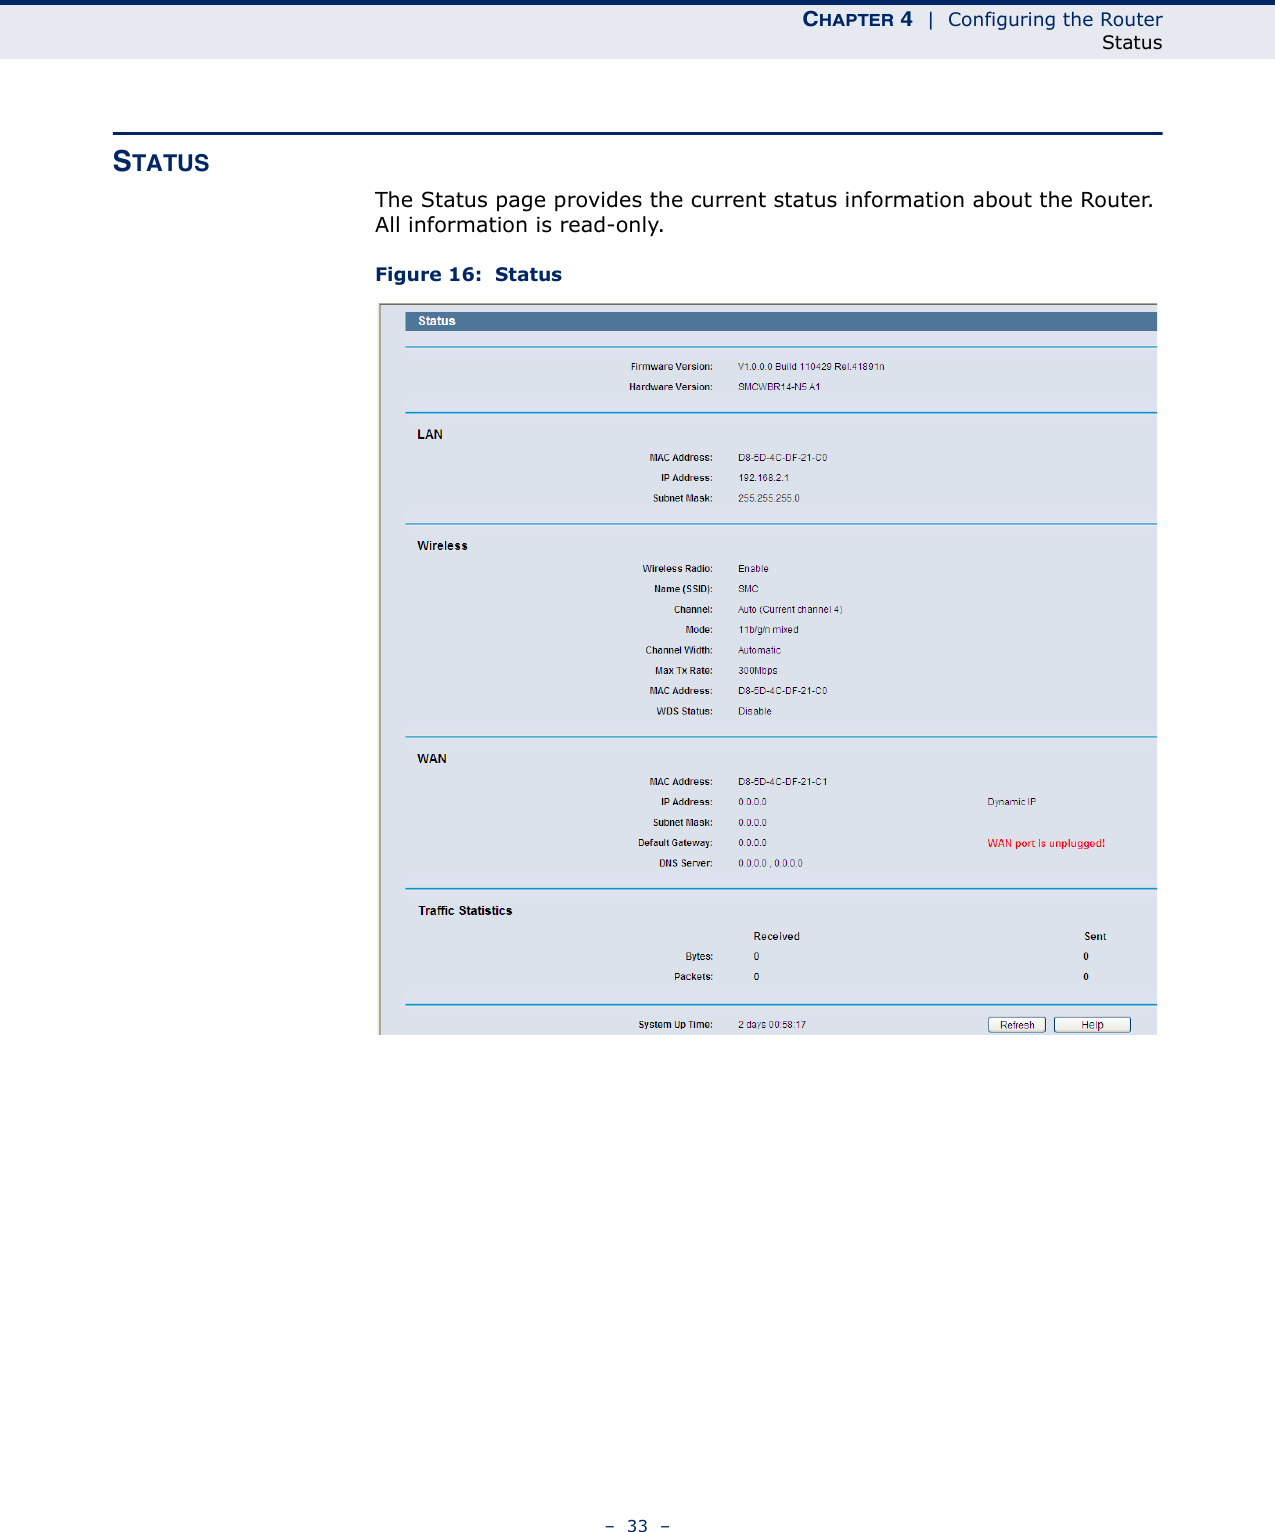 CHAPTER 4  |  Configuring the RouterStatus–  33  –STATUSThe Status page provides the current status information about the Router. All information is read-only.Figure 16:  Status